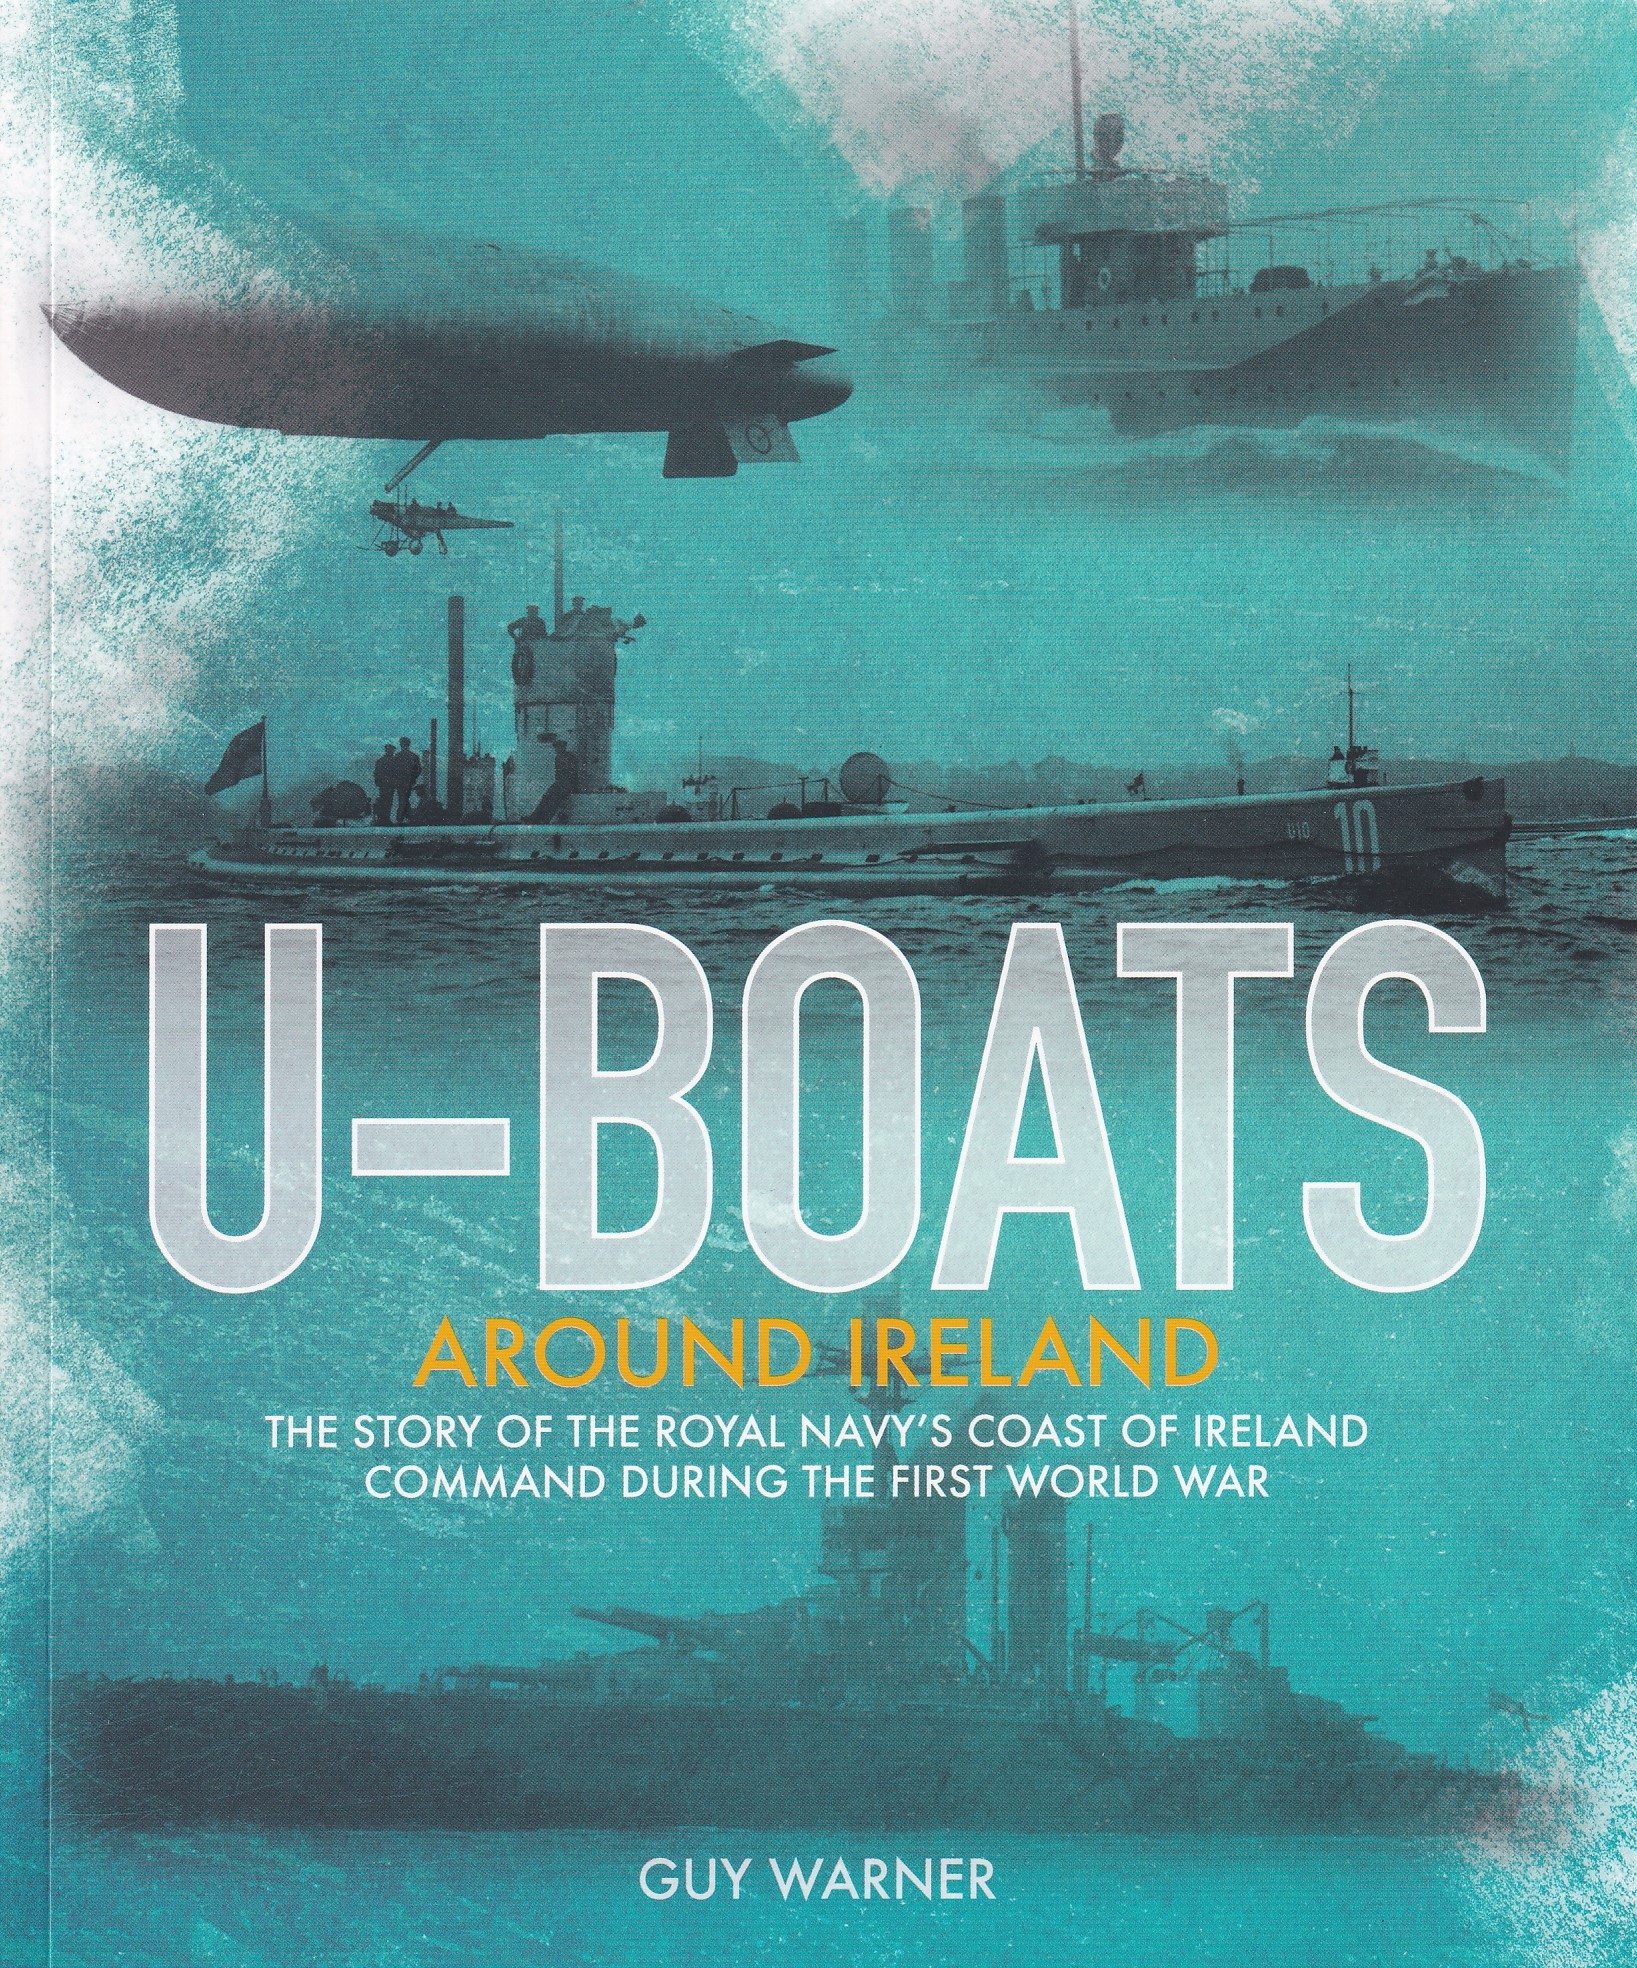 U-boats Around Ireland: The Story of the Royal Navy’s Coast of Ireland Command in the First World War by Guy Warner